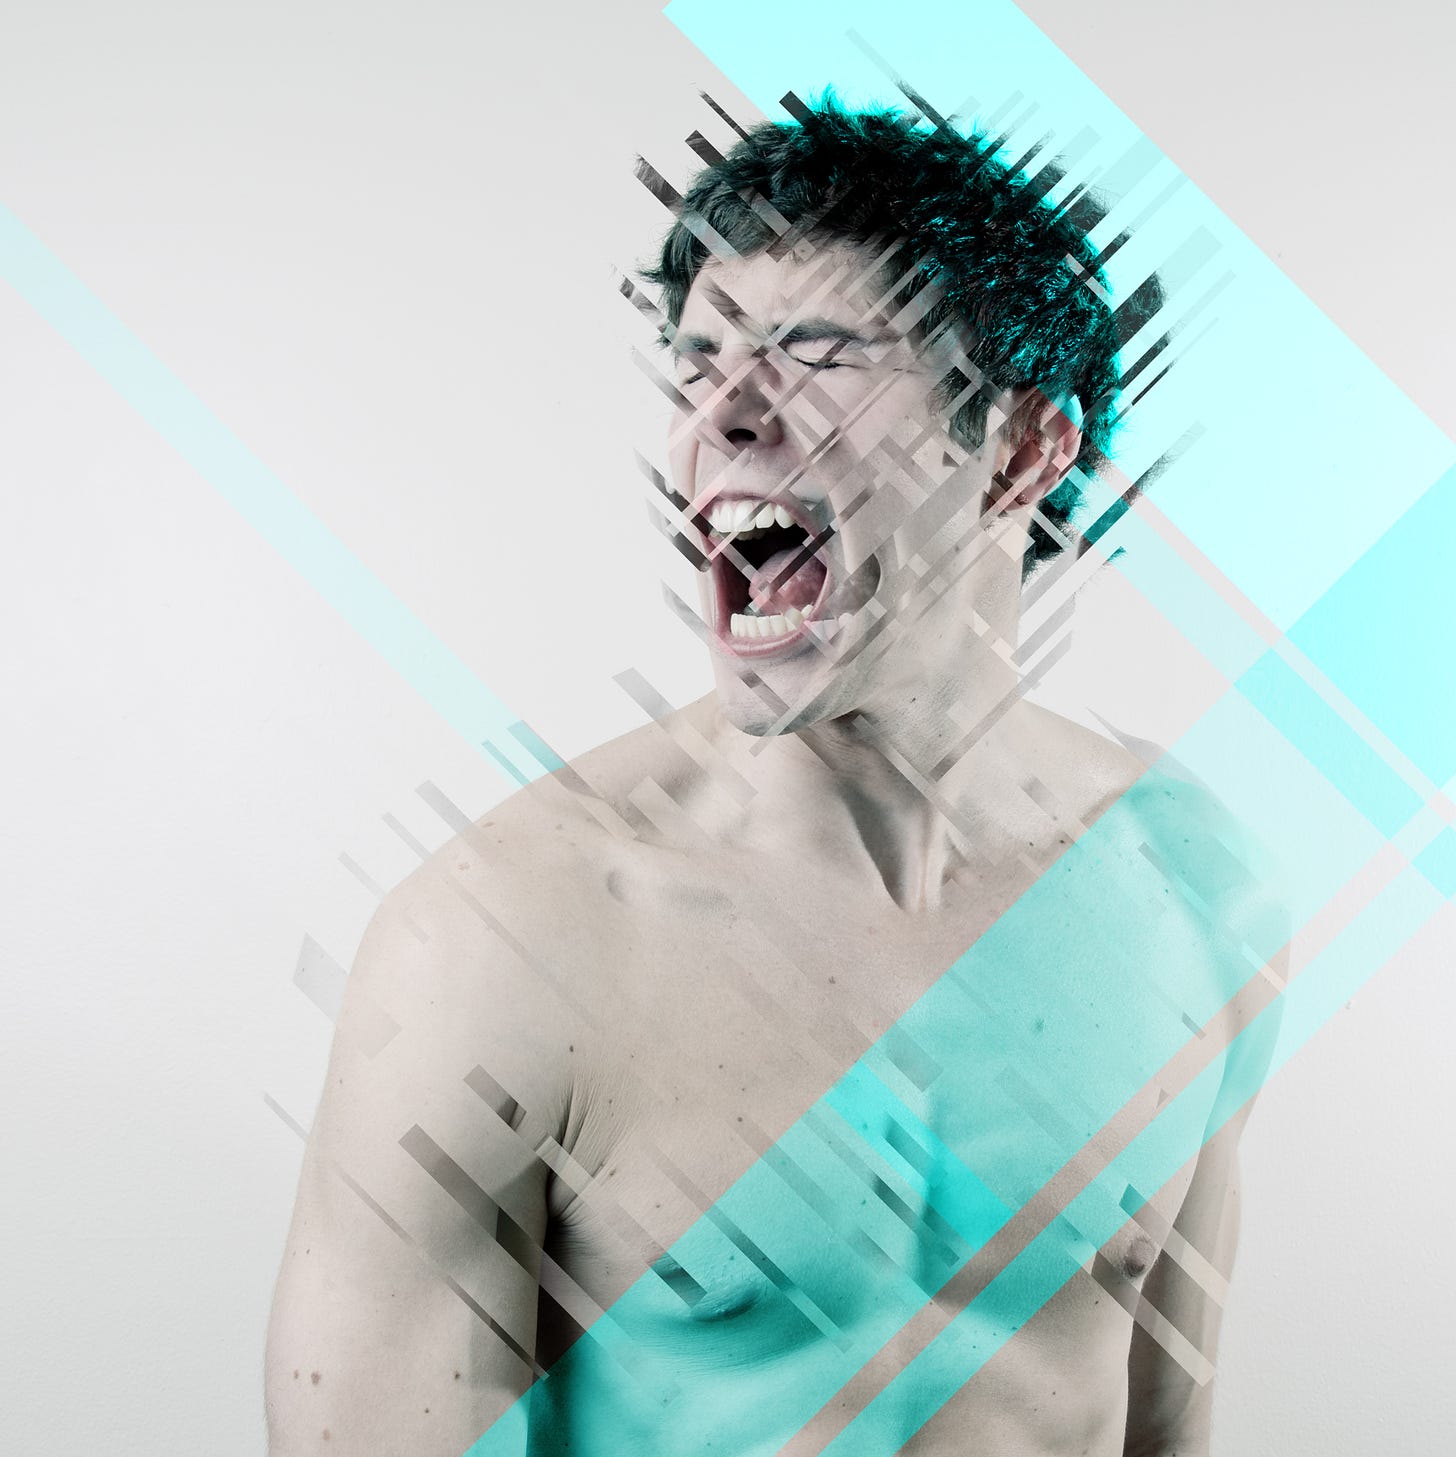 a white man, waist up, nude, screaming, looking toward the left, eyes closed, with photo effects across him rendering the image a bit artsy, blue and transparent lines cut through the figure... it's supposed to represent deconstruction or some shit idk, i'm not an artist, but it looked cool and edgy and that's the vibe of deconstruction right